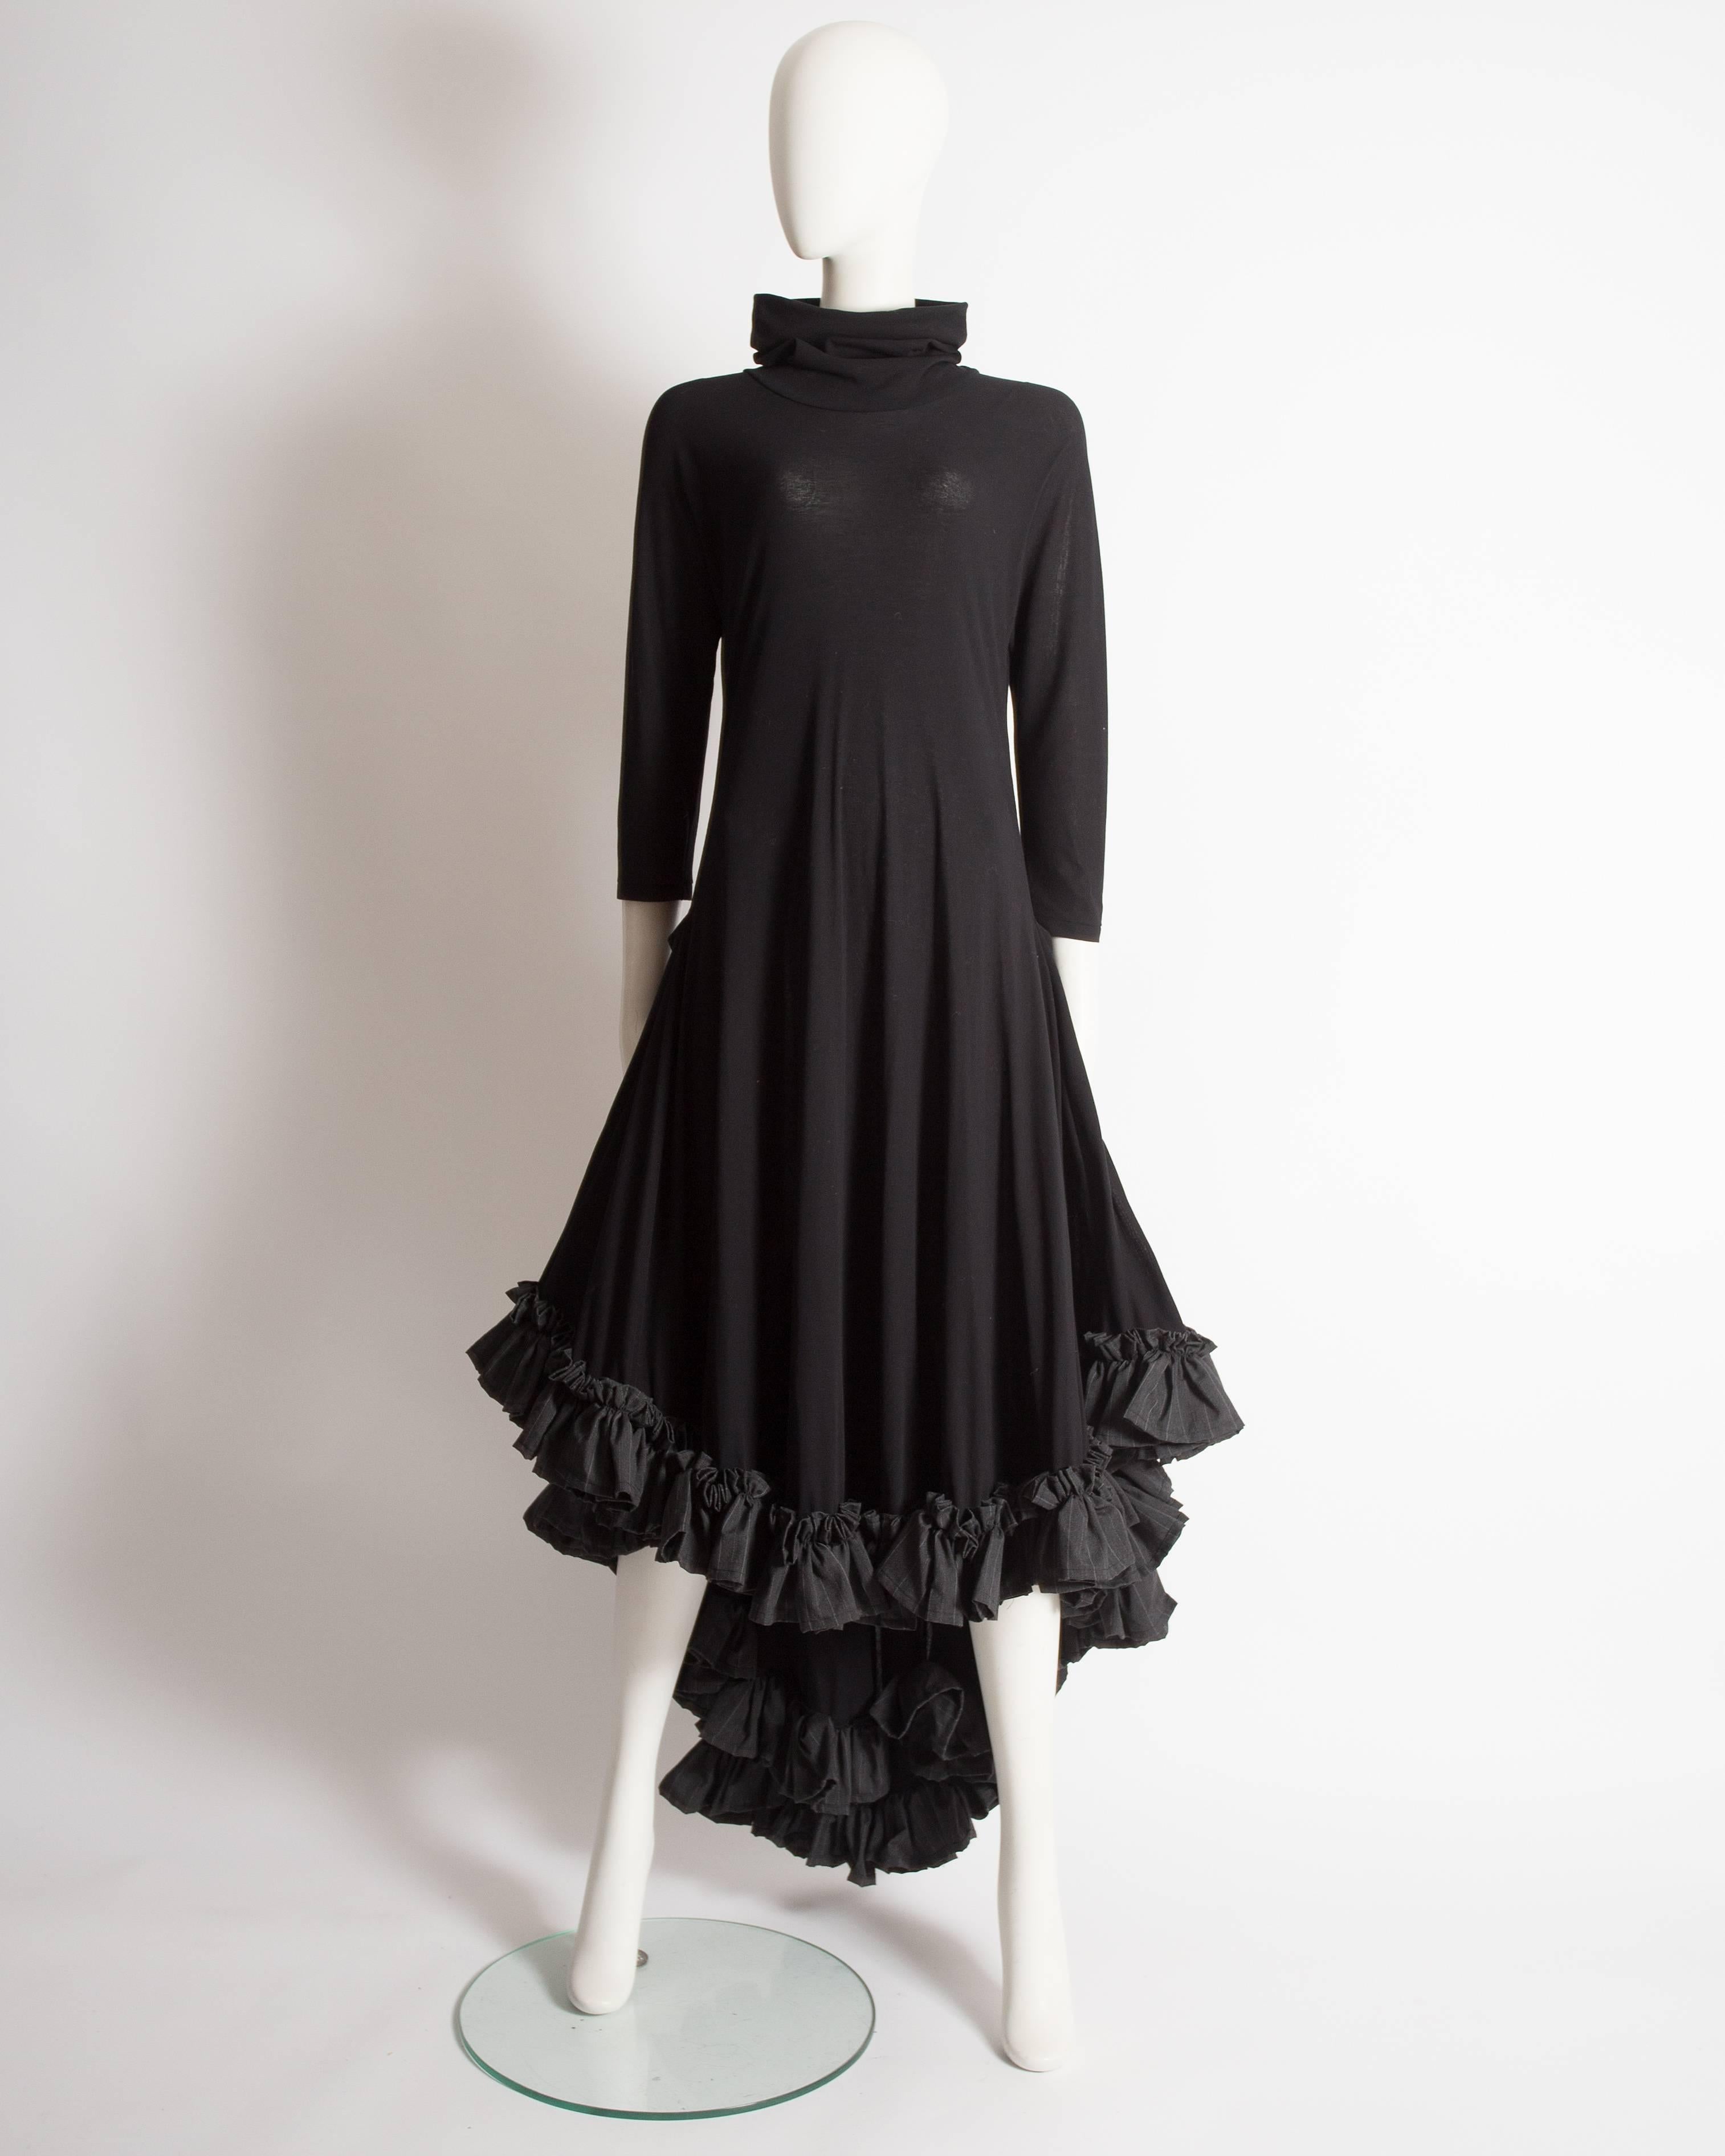 Fine and rare Yohji Yamamoto swing dress constructed in black wool with cowl neck and pinstripe cotton ruffled trim. 

Spring-Summer 1999

Excellent condition